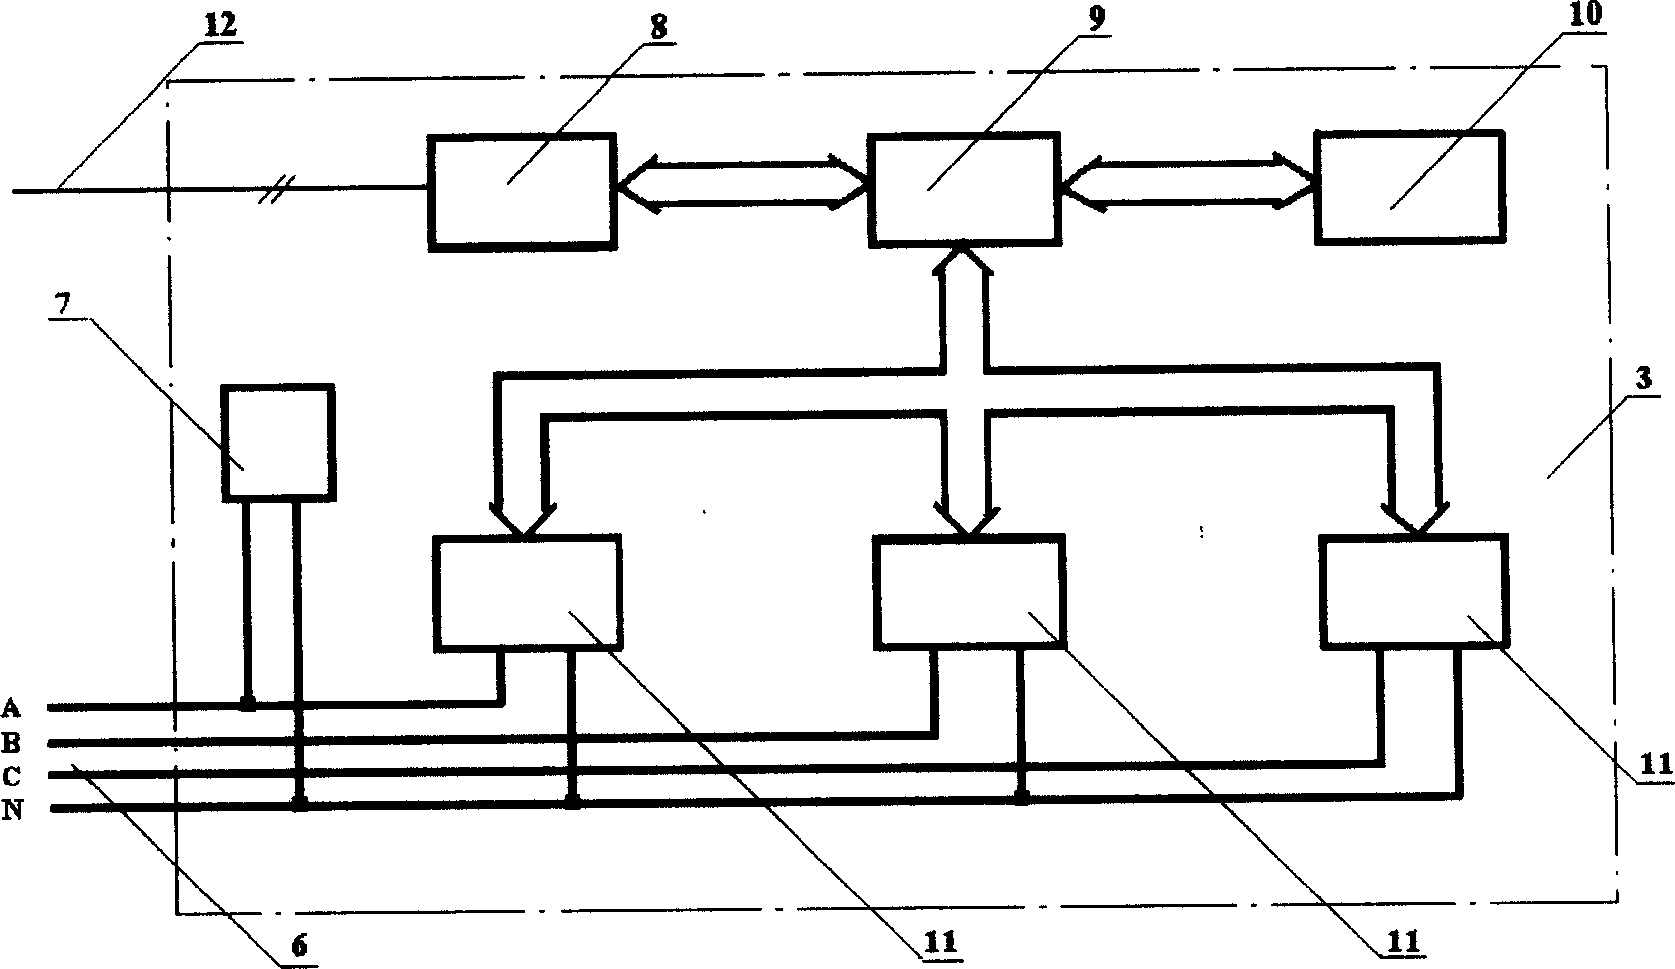 Carrier data safety protection method and recording system device of pre-payment meter